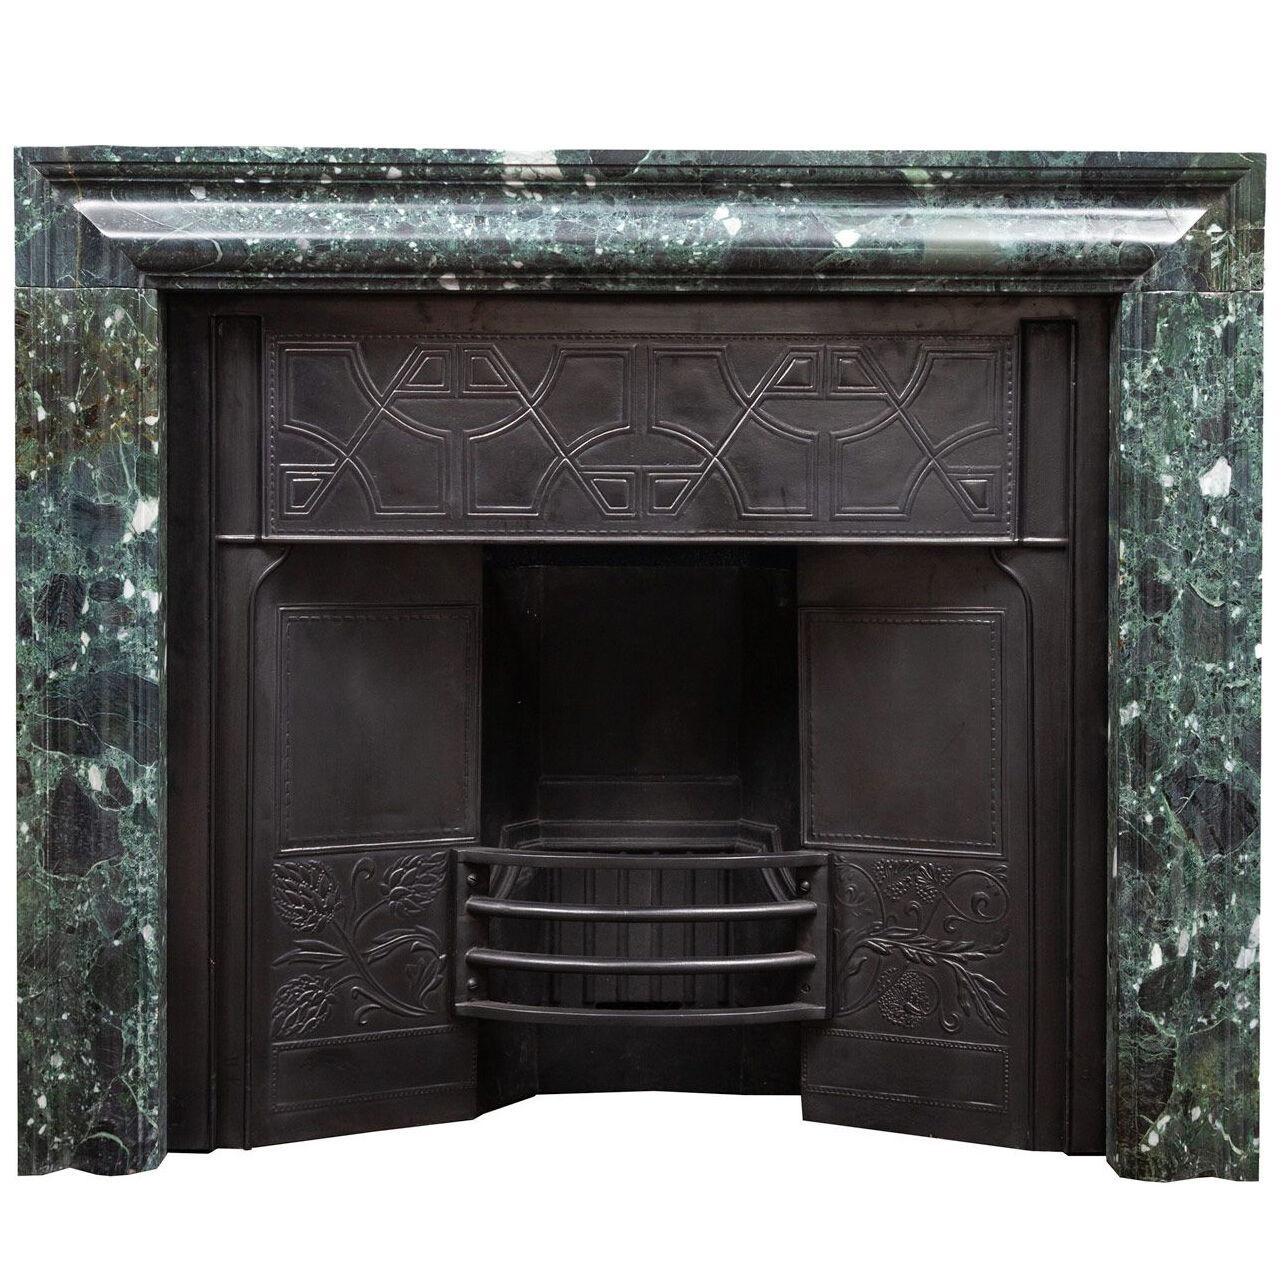 Antique Marble Bolection Fireplace with Metal Insert in the Mackintosh Style